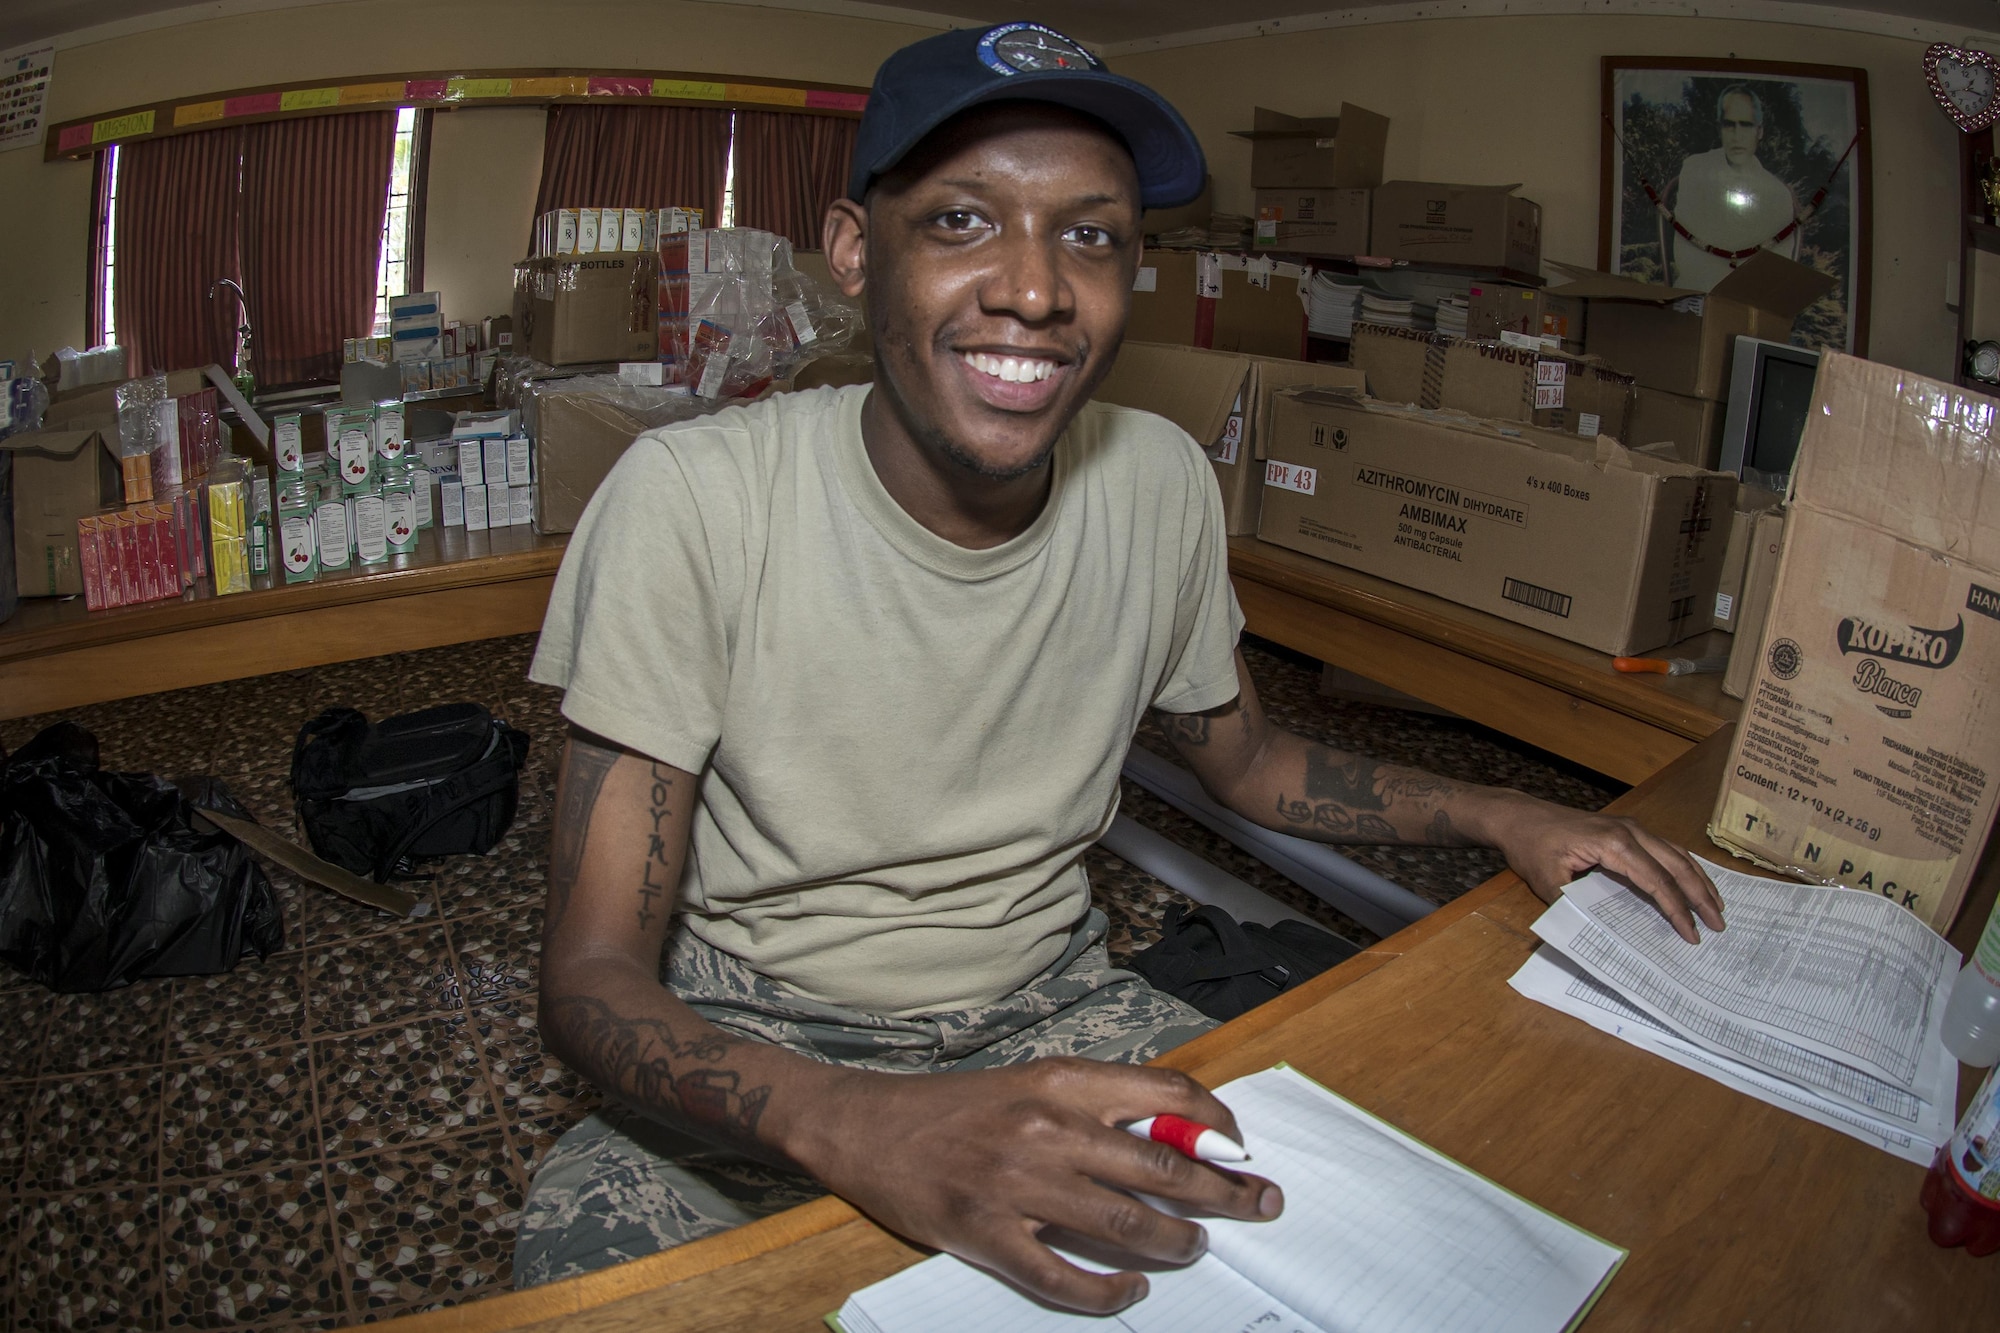 U.S. Air Force Staff Sgt. Marcus Hollins, a pharmacy technician with the 35th Medical Support Squadron at Misawa Air Base, Japan, smiles for the camera as he reviews pharmaceutical inventories during Pacific Angel 17-3 at the Tagitagi Sangam School and Kindergarten in Tavua, Fiji, July 17, 2017. The pharmacy provides all the medications participating health care professionals require to treat patients who come to the health services site seeking care.  PACANGEL 17-3 builds partnerships between the US, Fiji, and several regional nations by conducting multilateral humanitarian assistance and civil military operations, promoting regional military-civilian-nongovernmental organization cooperation and interoperability. (U.S. Air Force photo by Tech. Sgt. Benjamin W. Stratton)